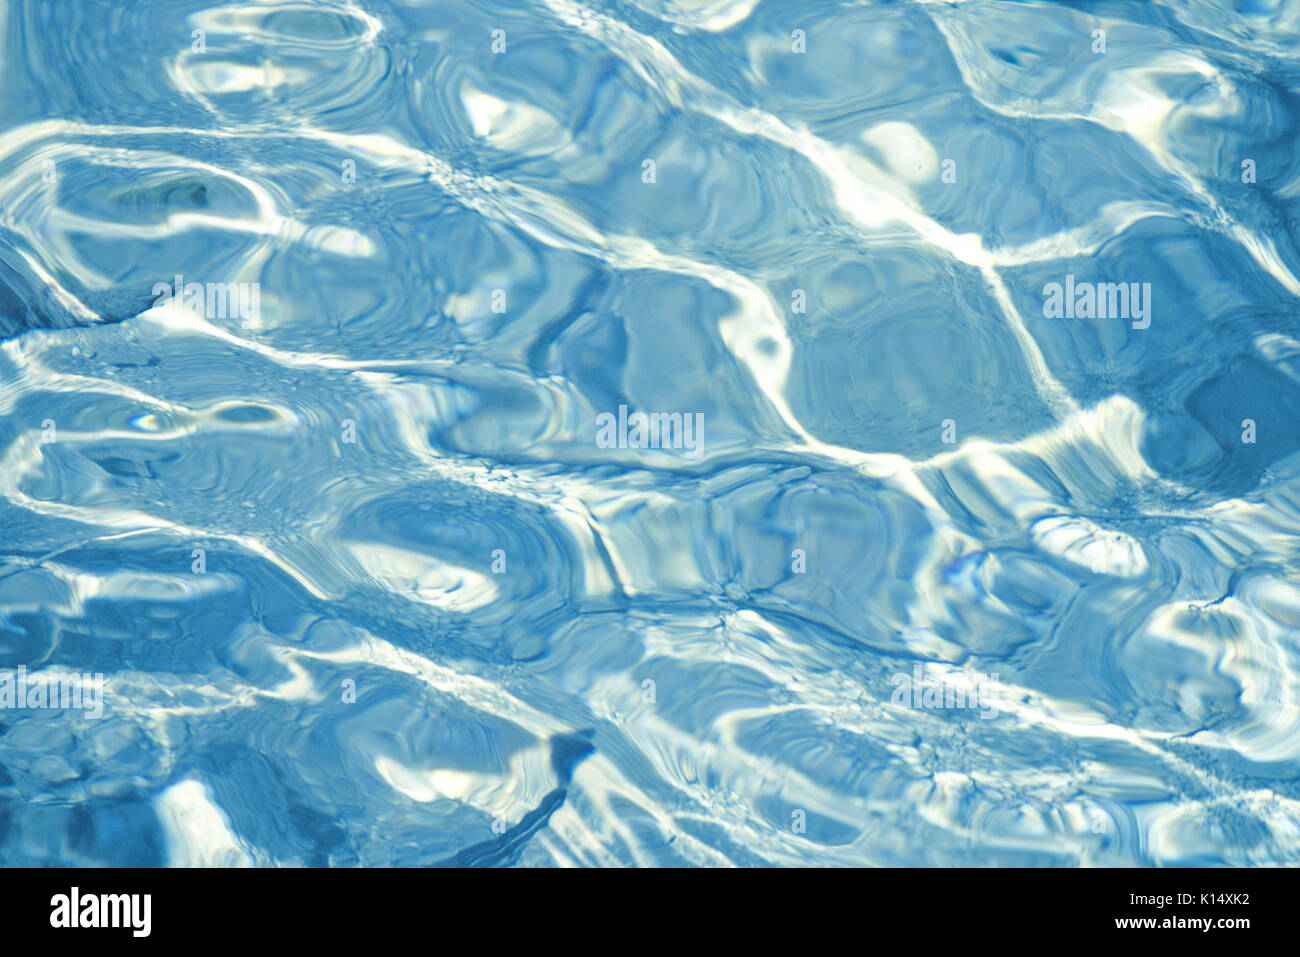 Shallow water over gravel bottom with reflections and small rippling waves Stock Photo